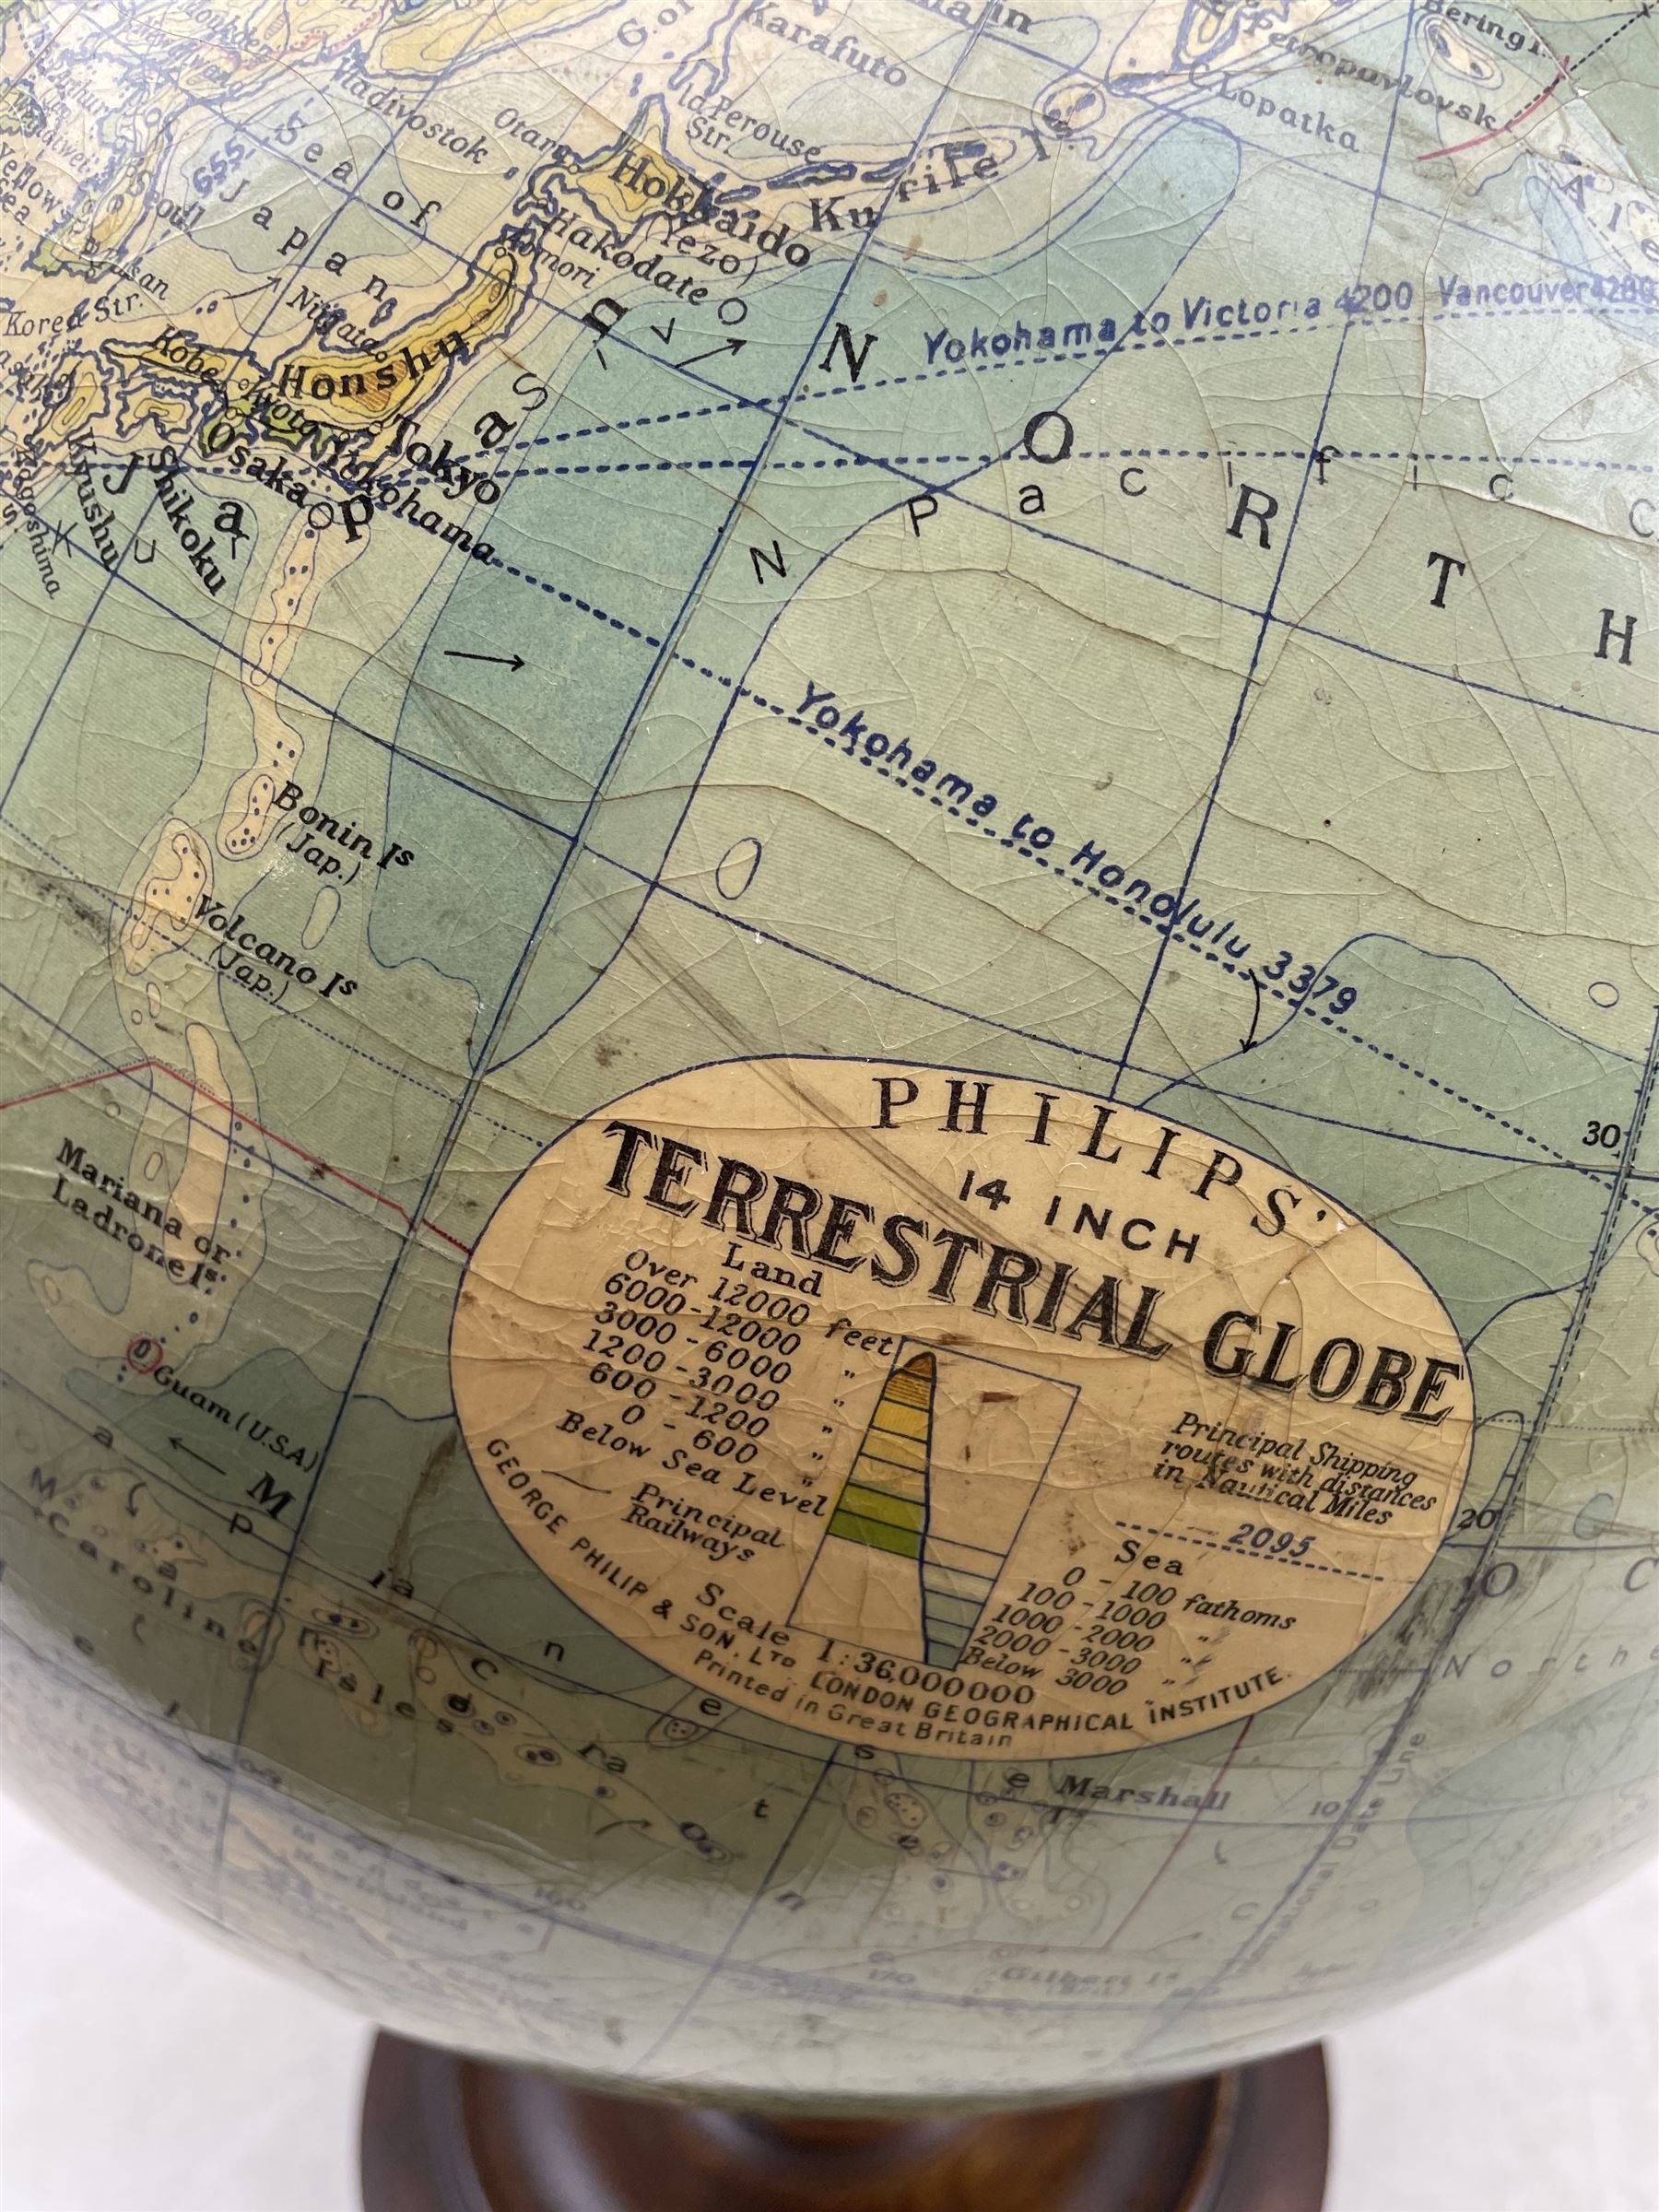 Phillips 14 Inch Terrestrial Globe by George Philip & Son Ltd for the London Geographical Institute - Image 4 of 4